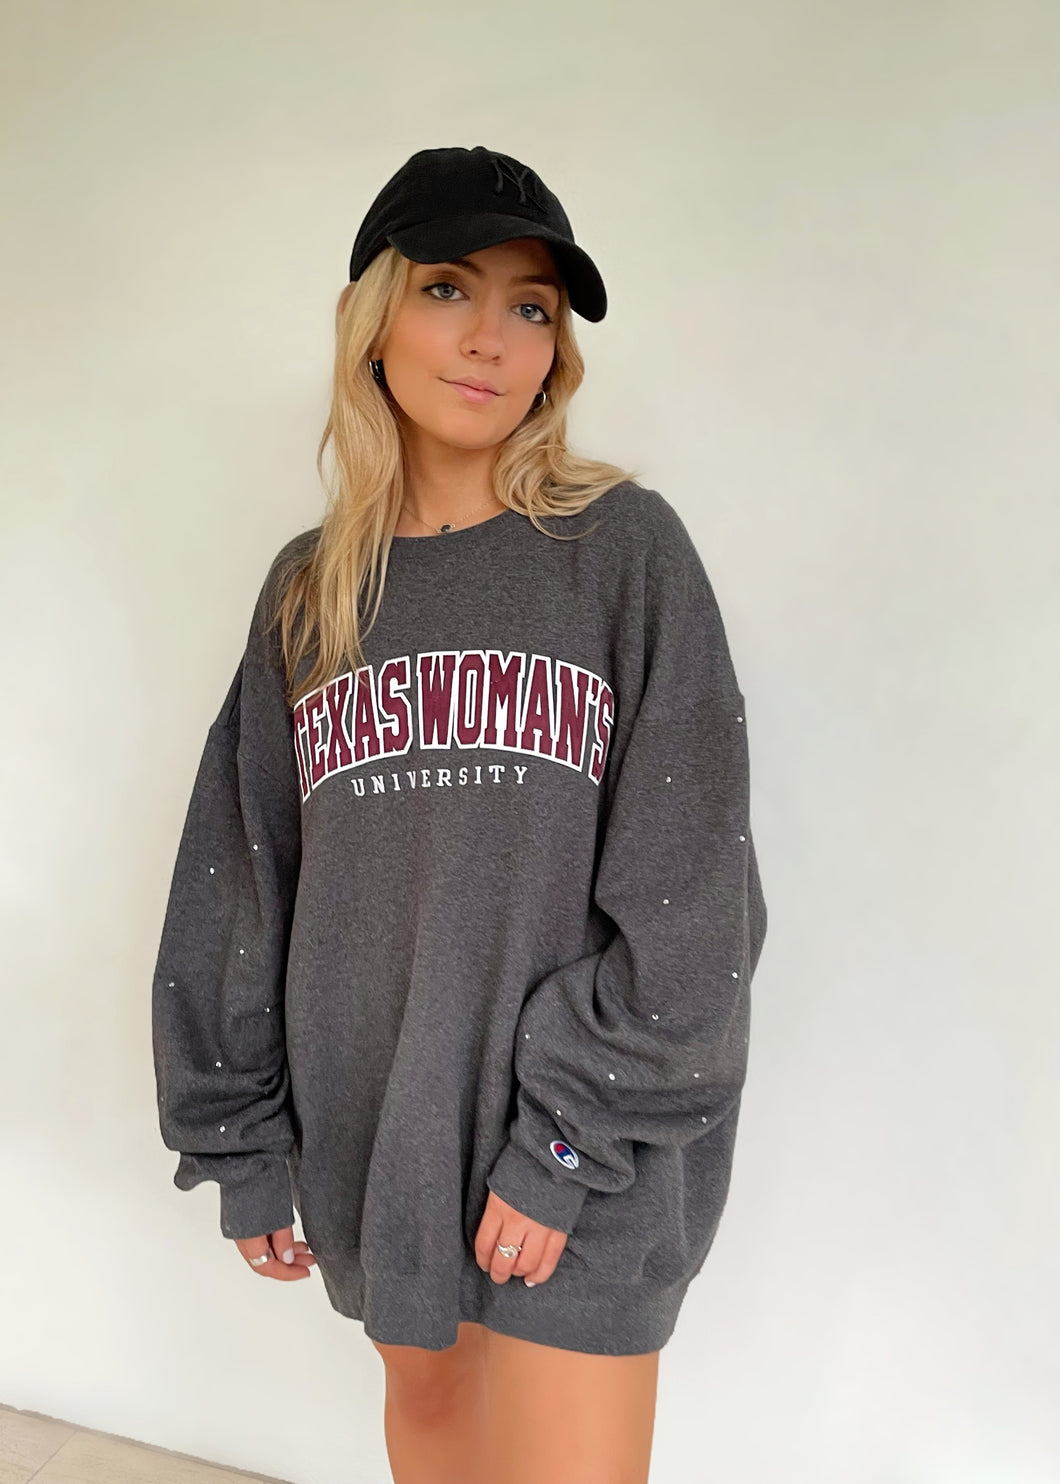 Texas Woman’s University, One of a KIND Vintage Sweatshirt with Crystal Star Design